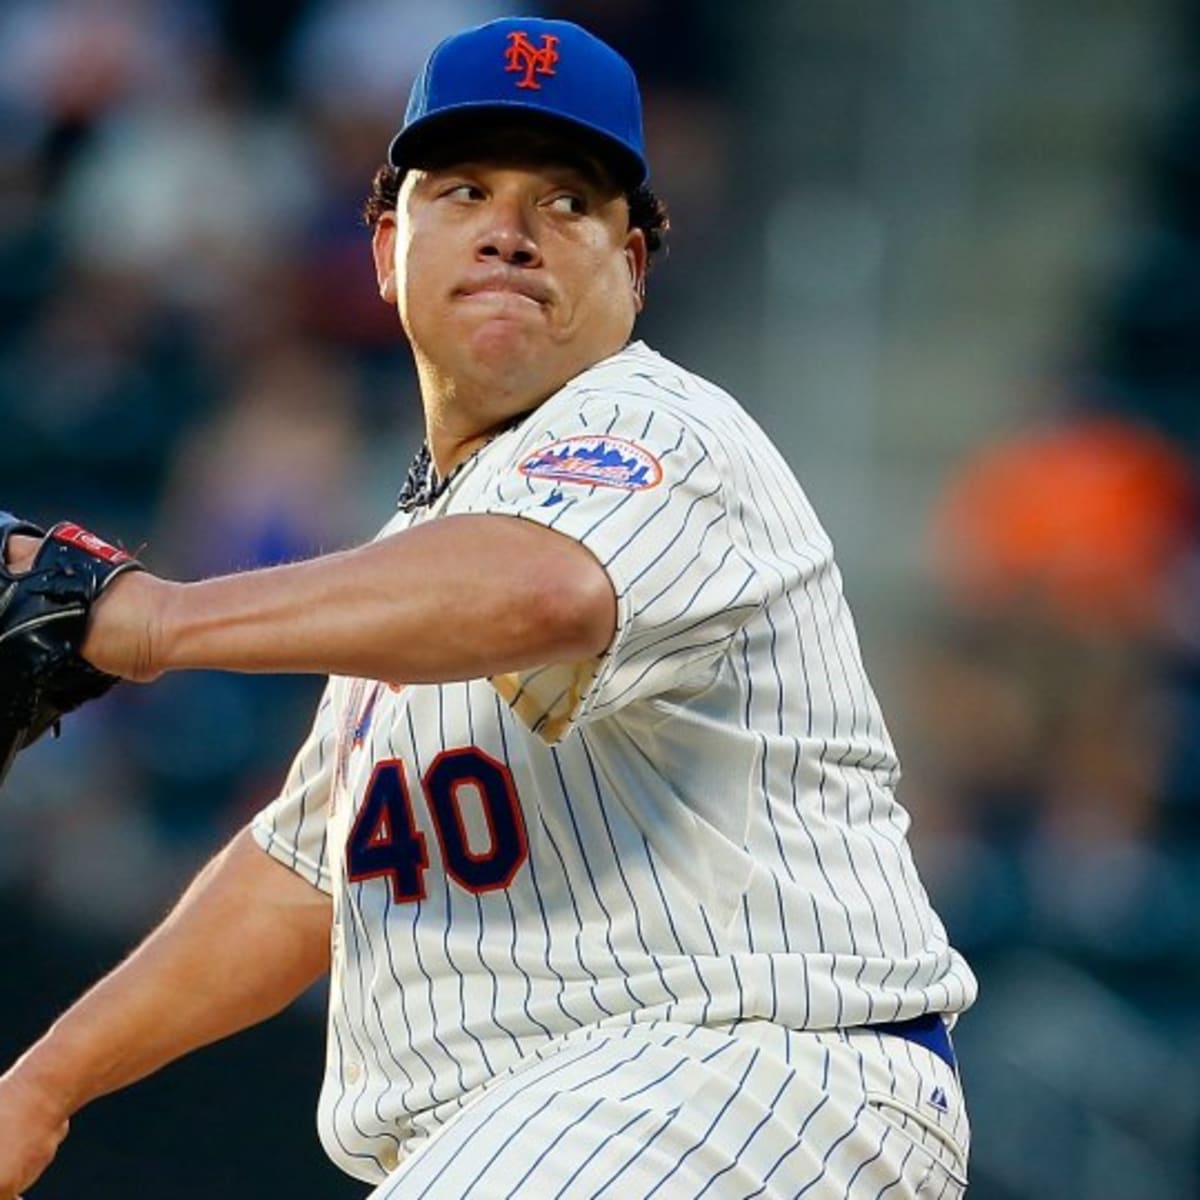 Of Course Bartolo Colon Had A Pet Donkey Named Pancho Growing Up